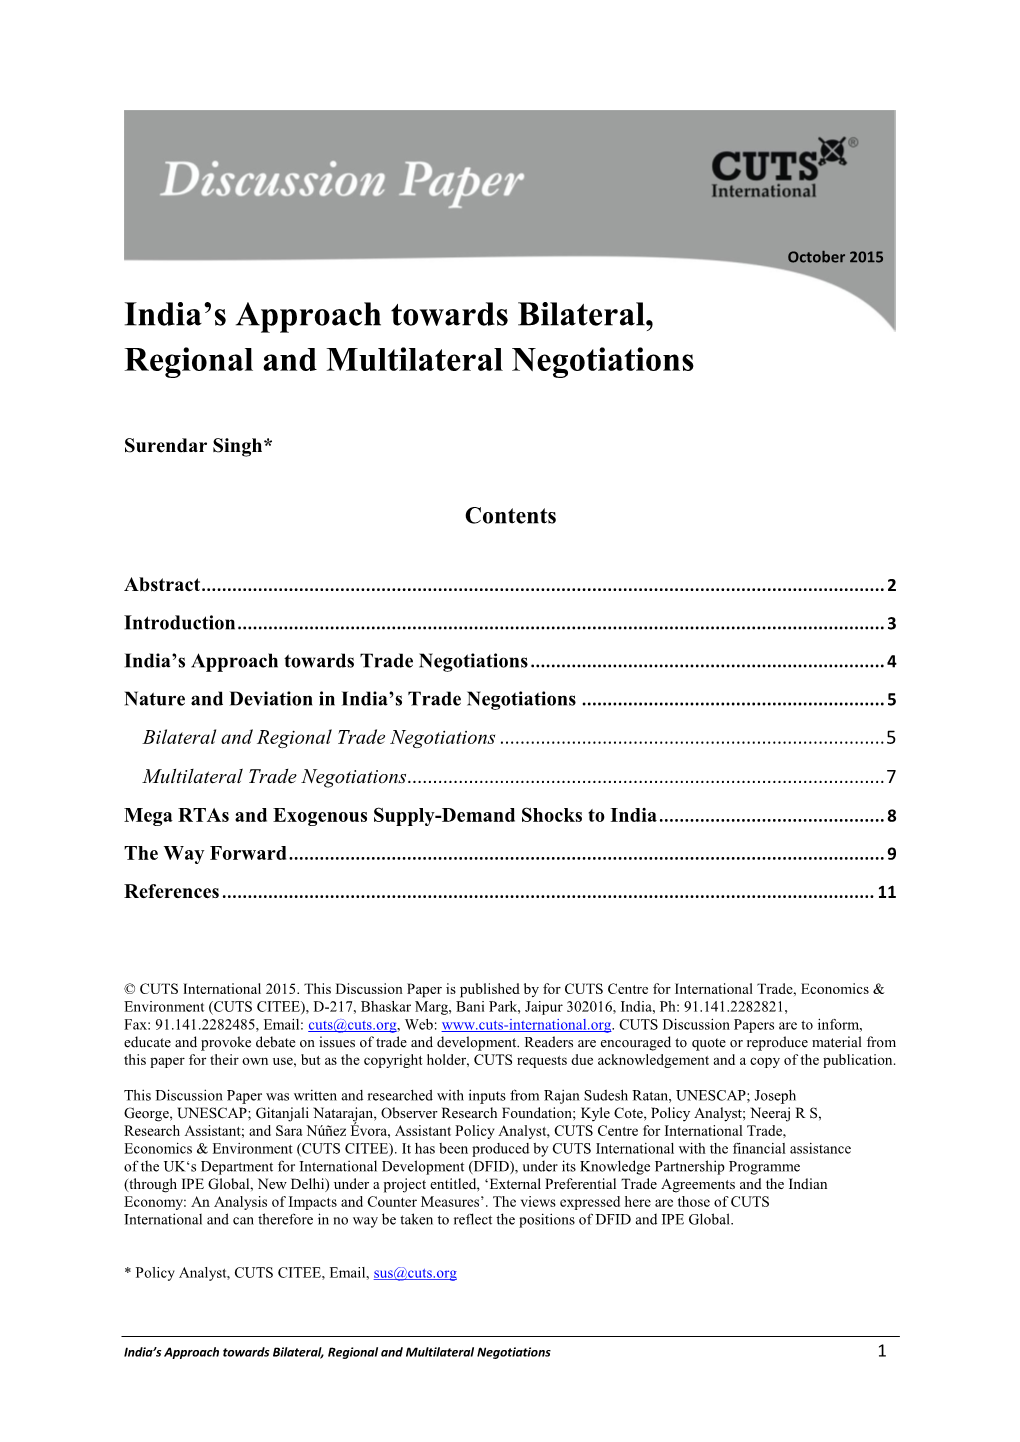 India's Approach Towards Bilateral, Regional and Multilateral